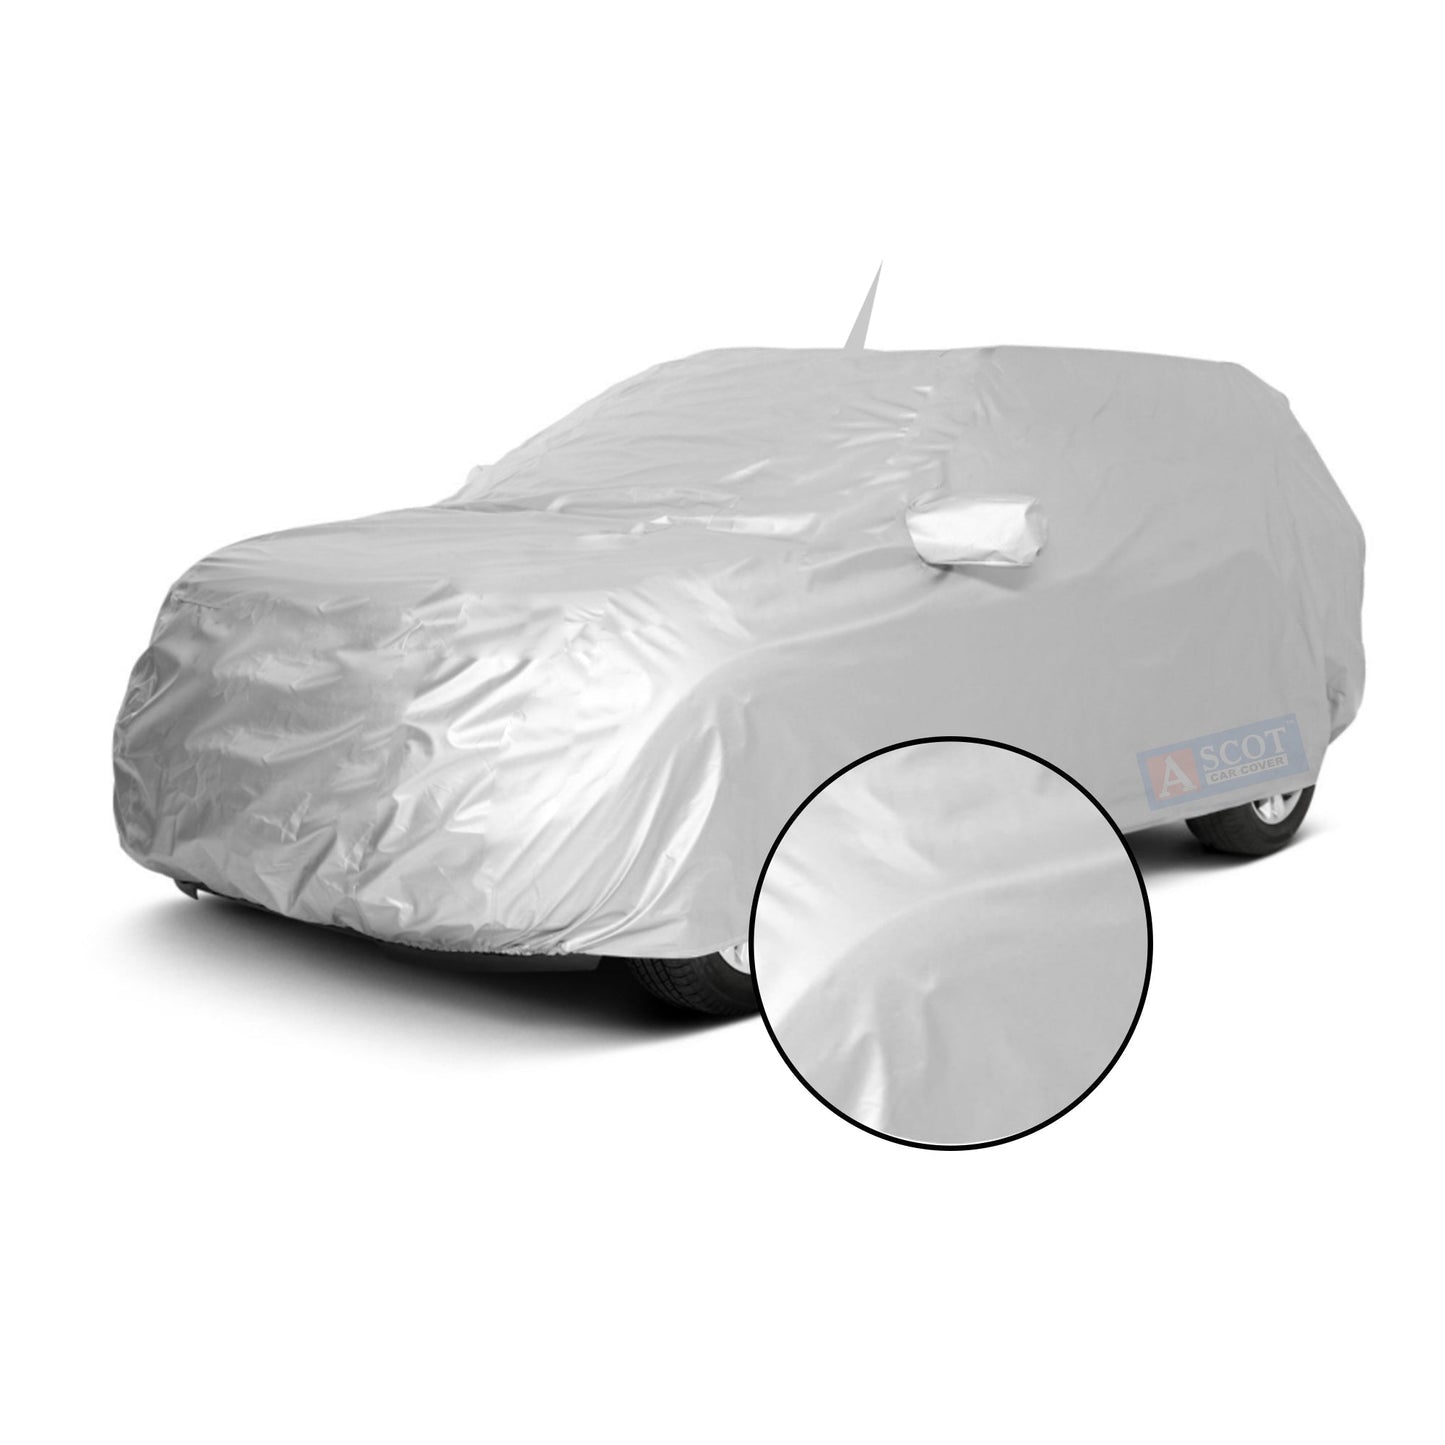 Ascot Volkswagen Jetta Car Body Cover 2005-2010 Model Dust Proof, Trippel Stitched